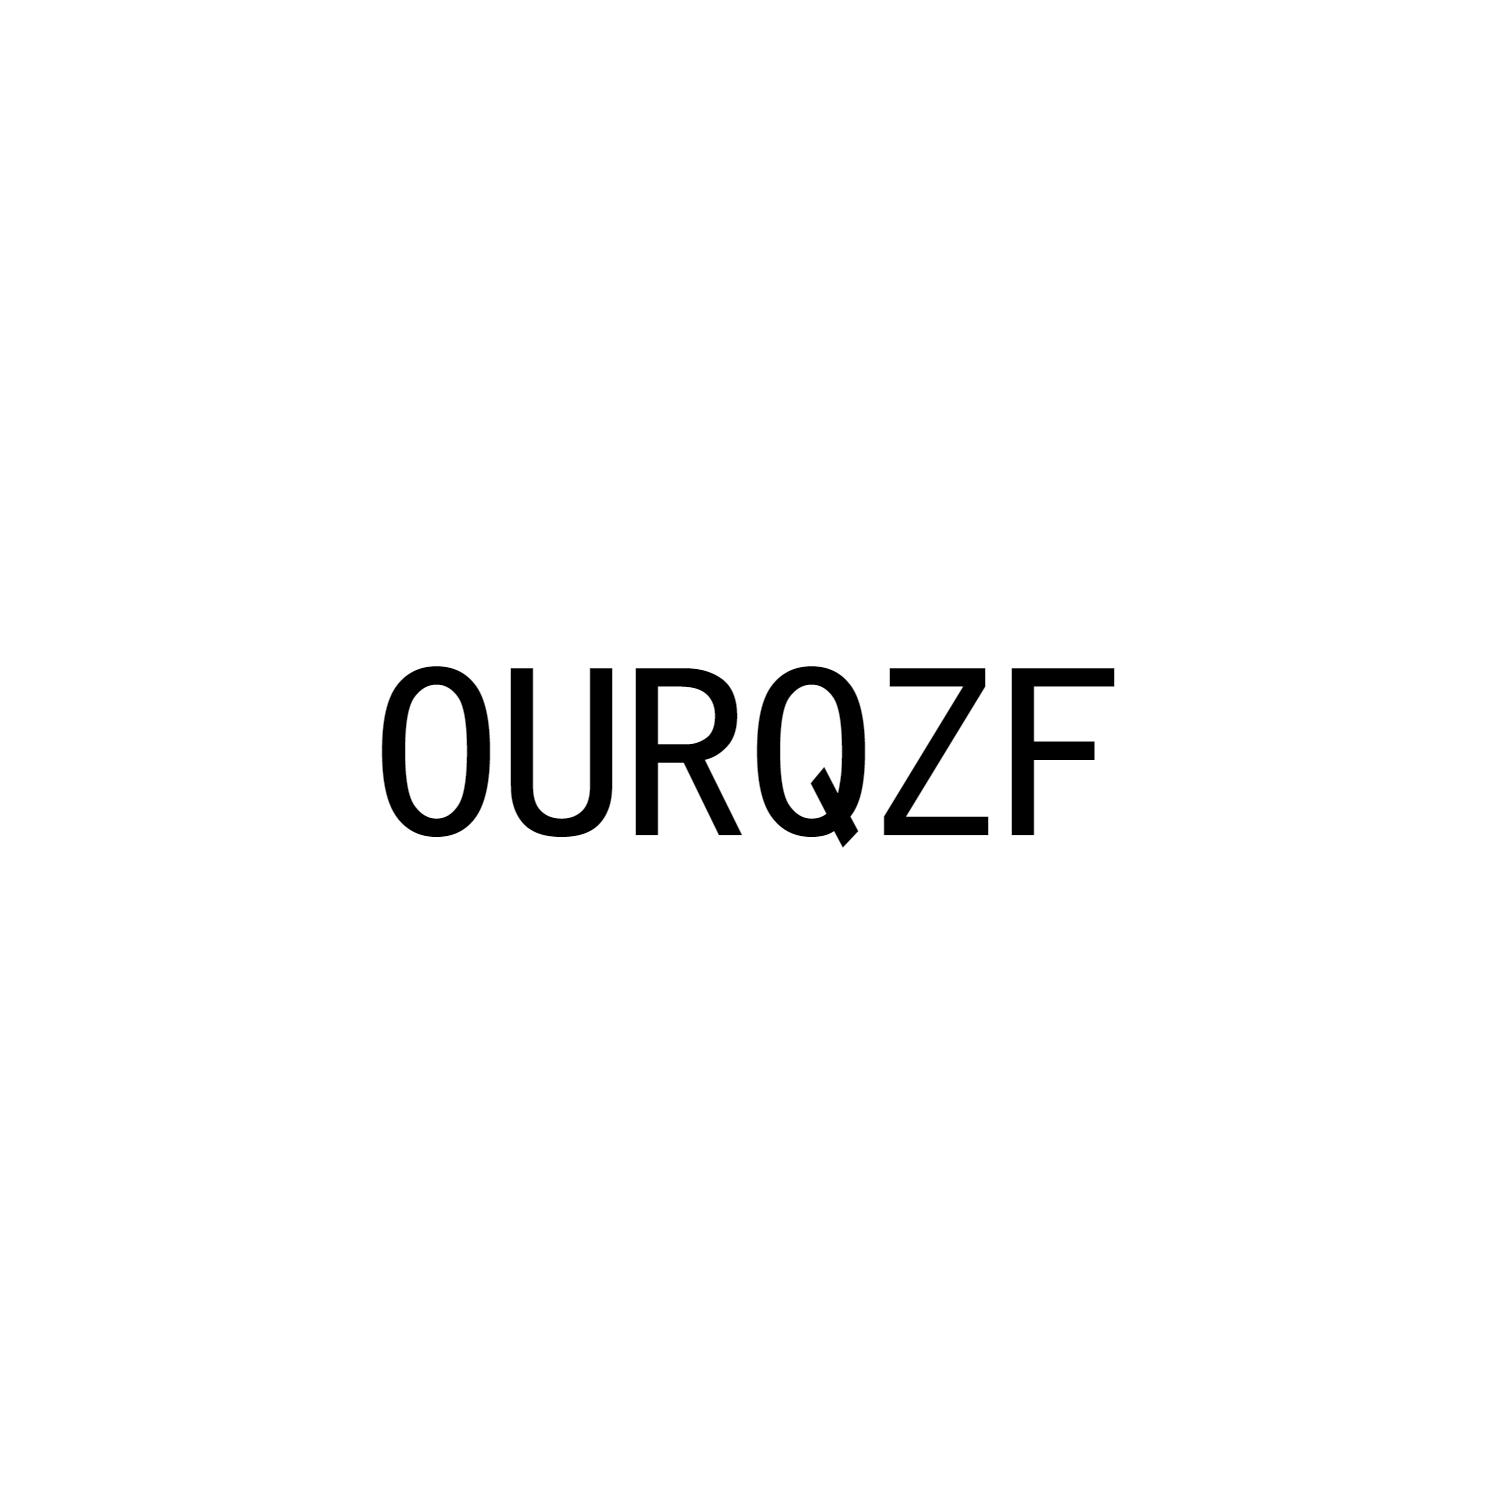 OURQZF